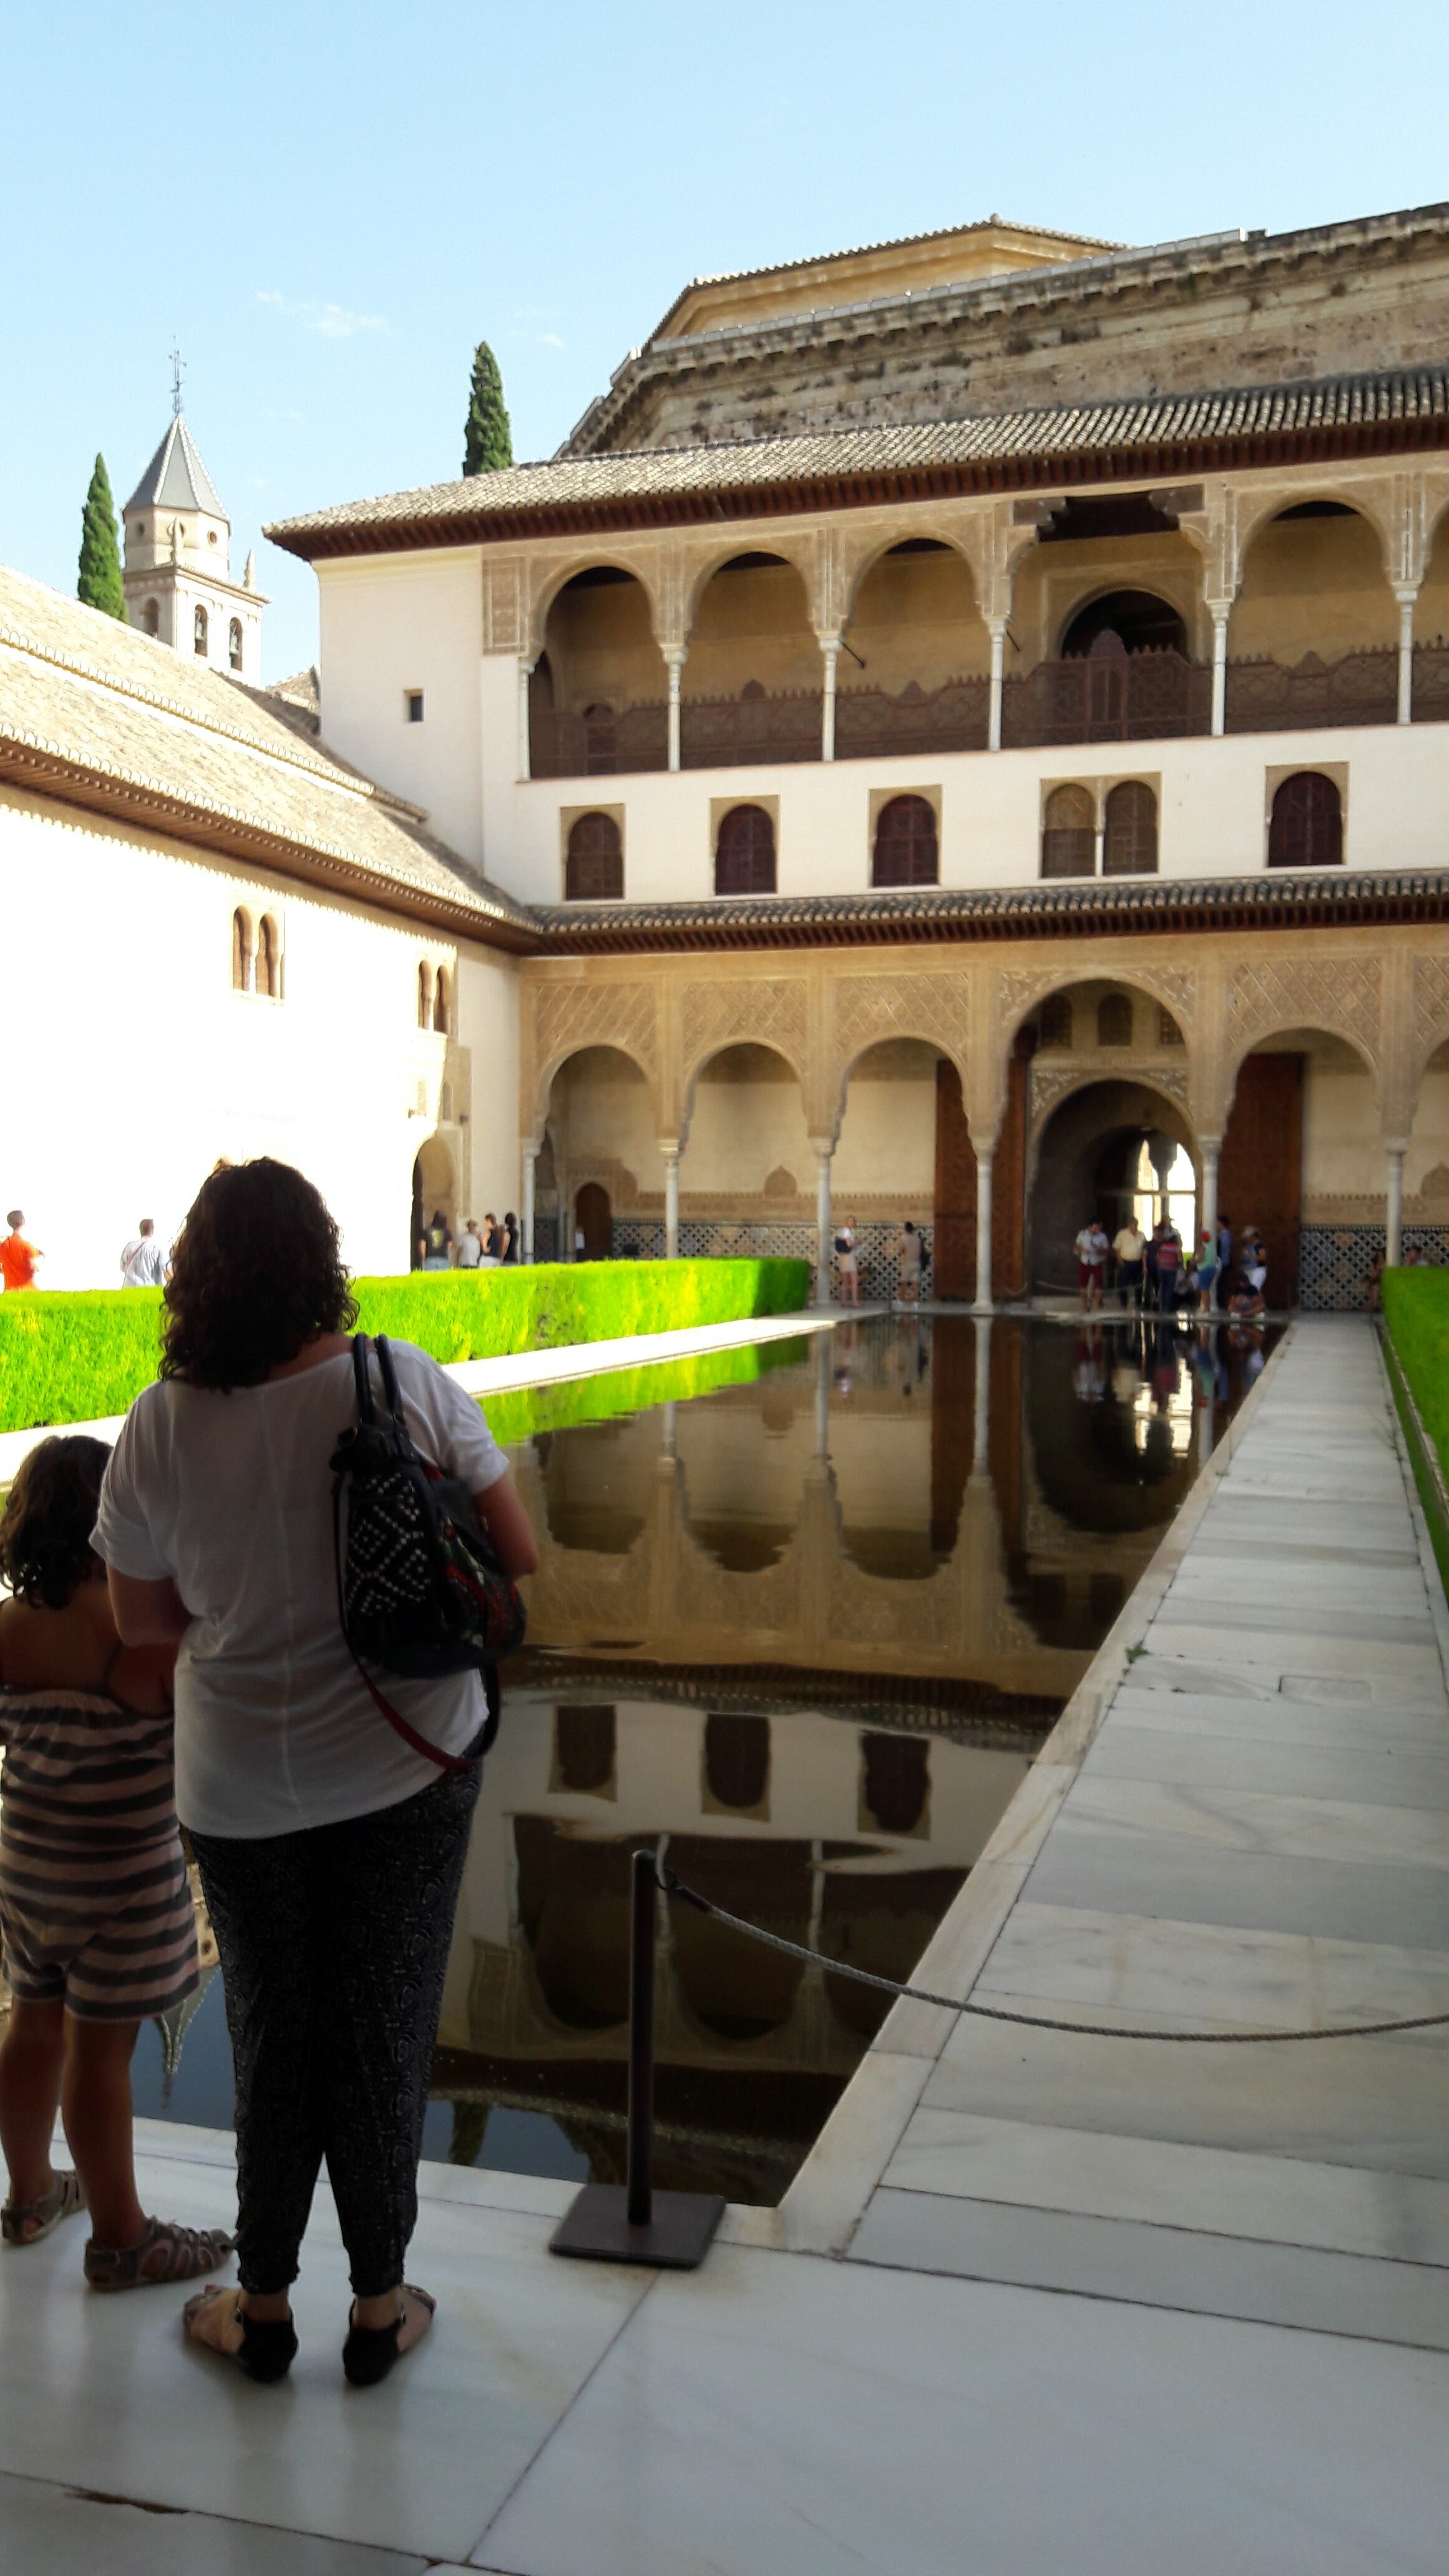 Definitely factor in some time to reflect in the Palaces of the Alhambra.